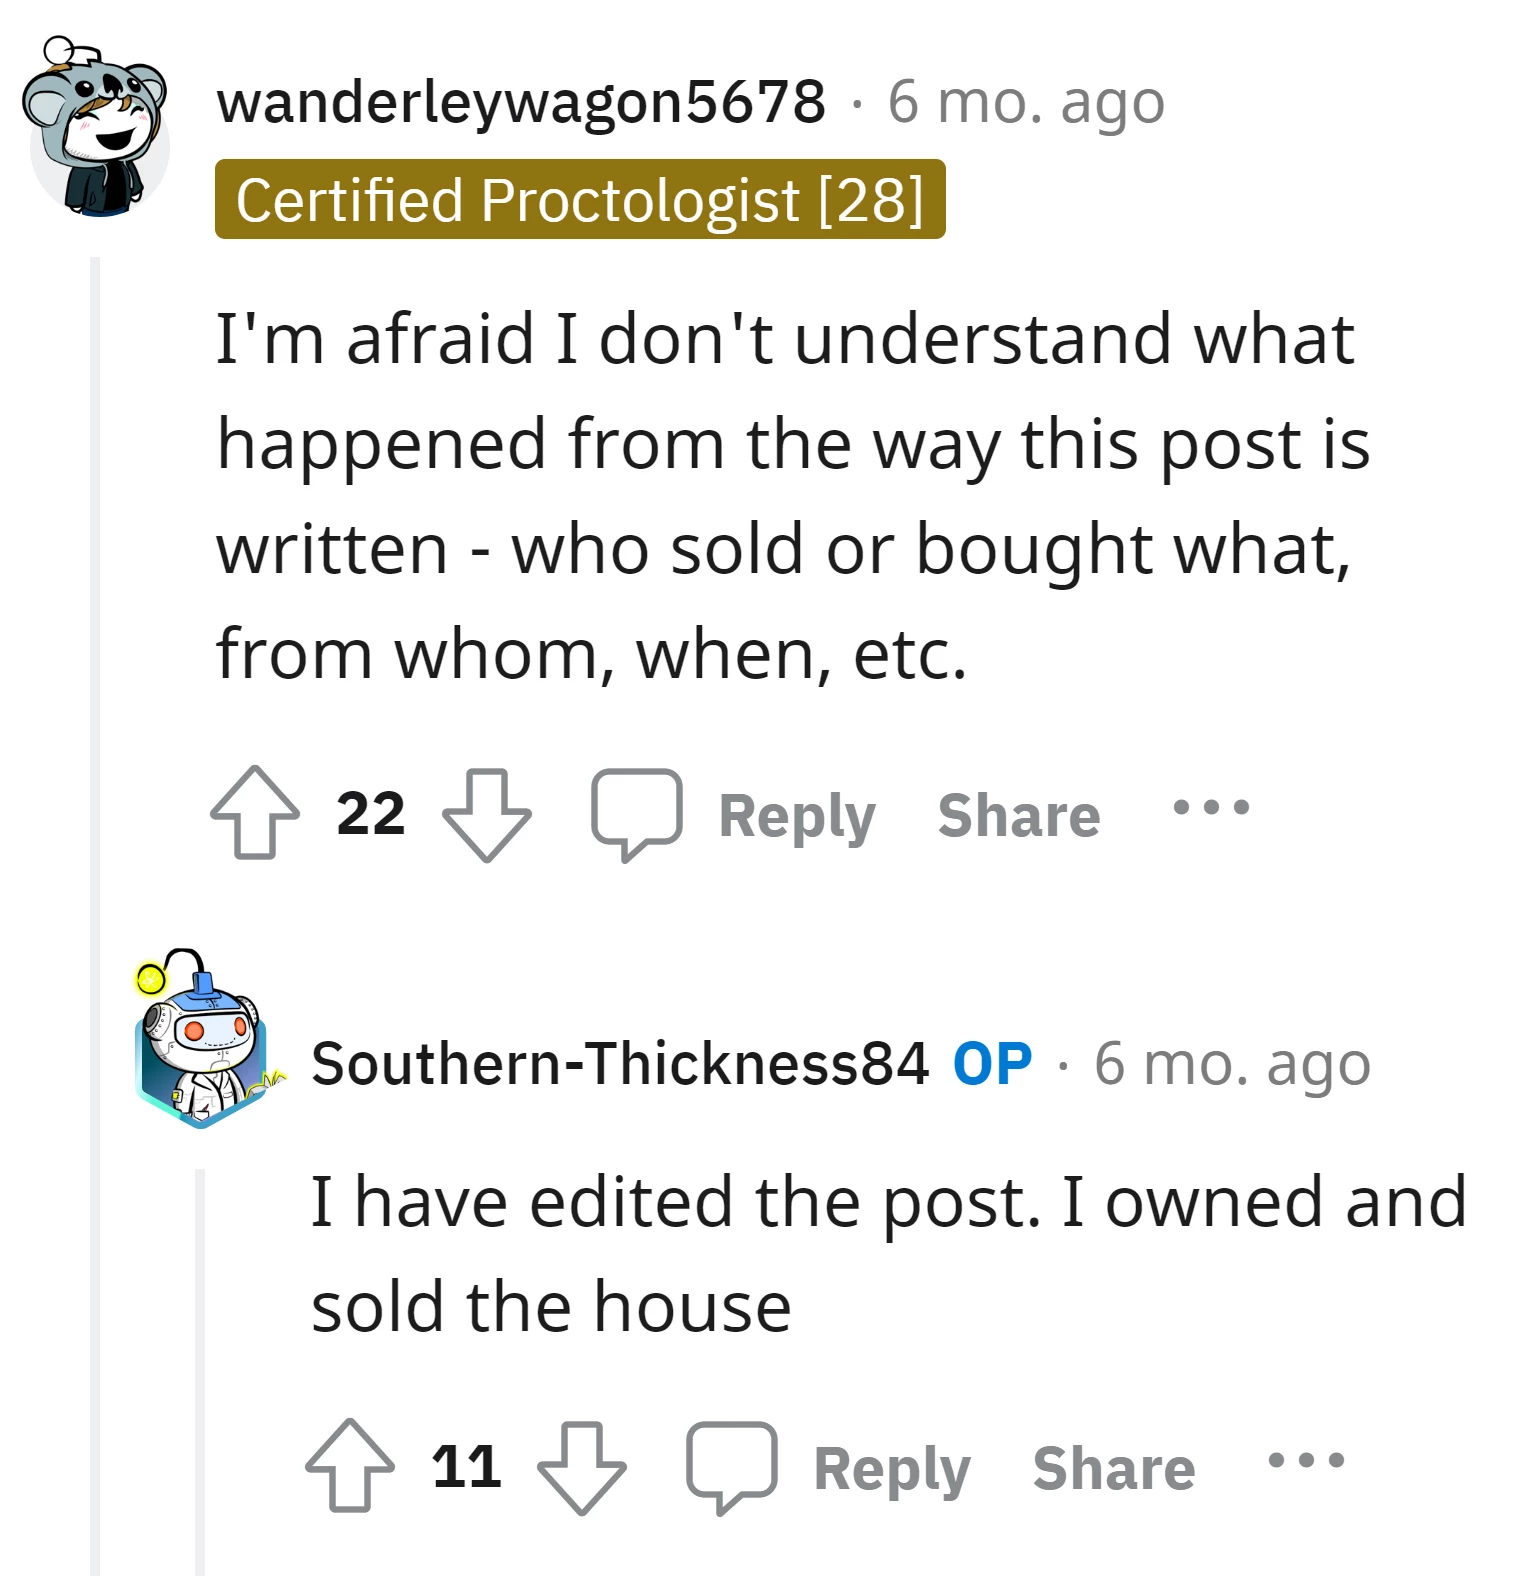 OP owned and sold the house